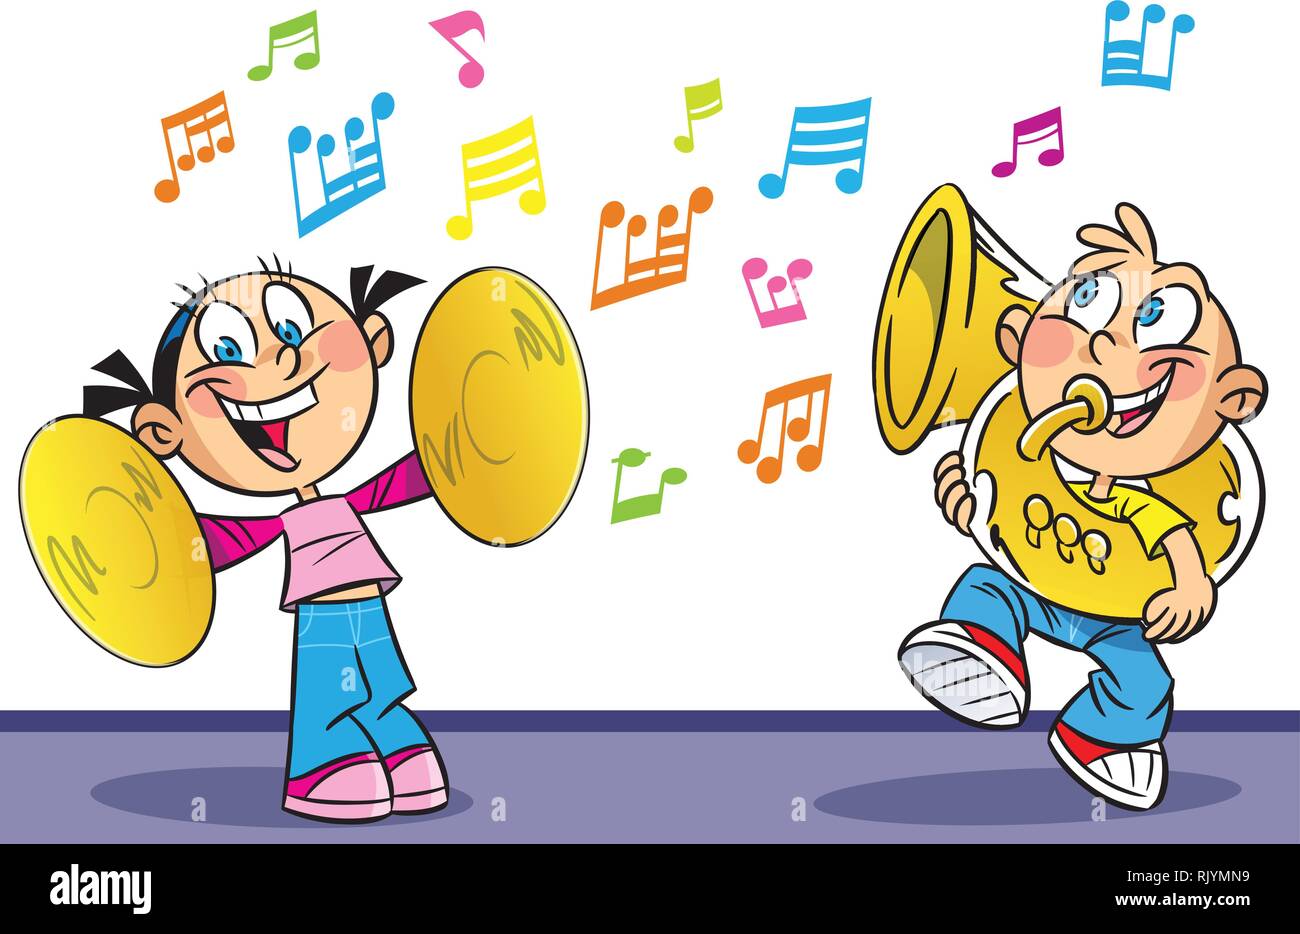 The following illustration shows cartoon boy and girl who play musical instruments. Illustration done on separate layers. Stock Vector